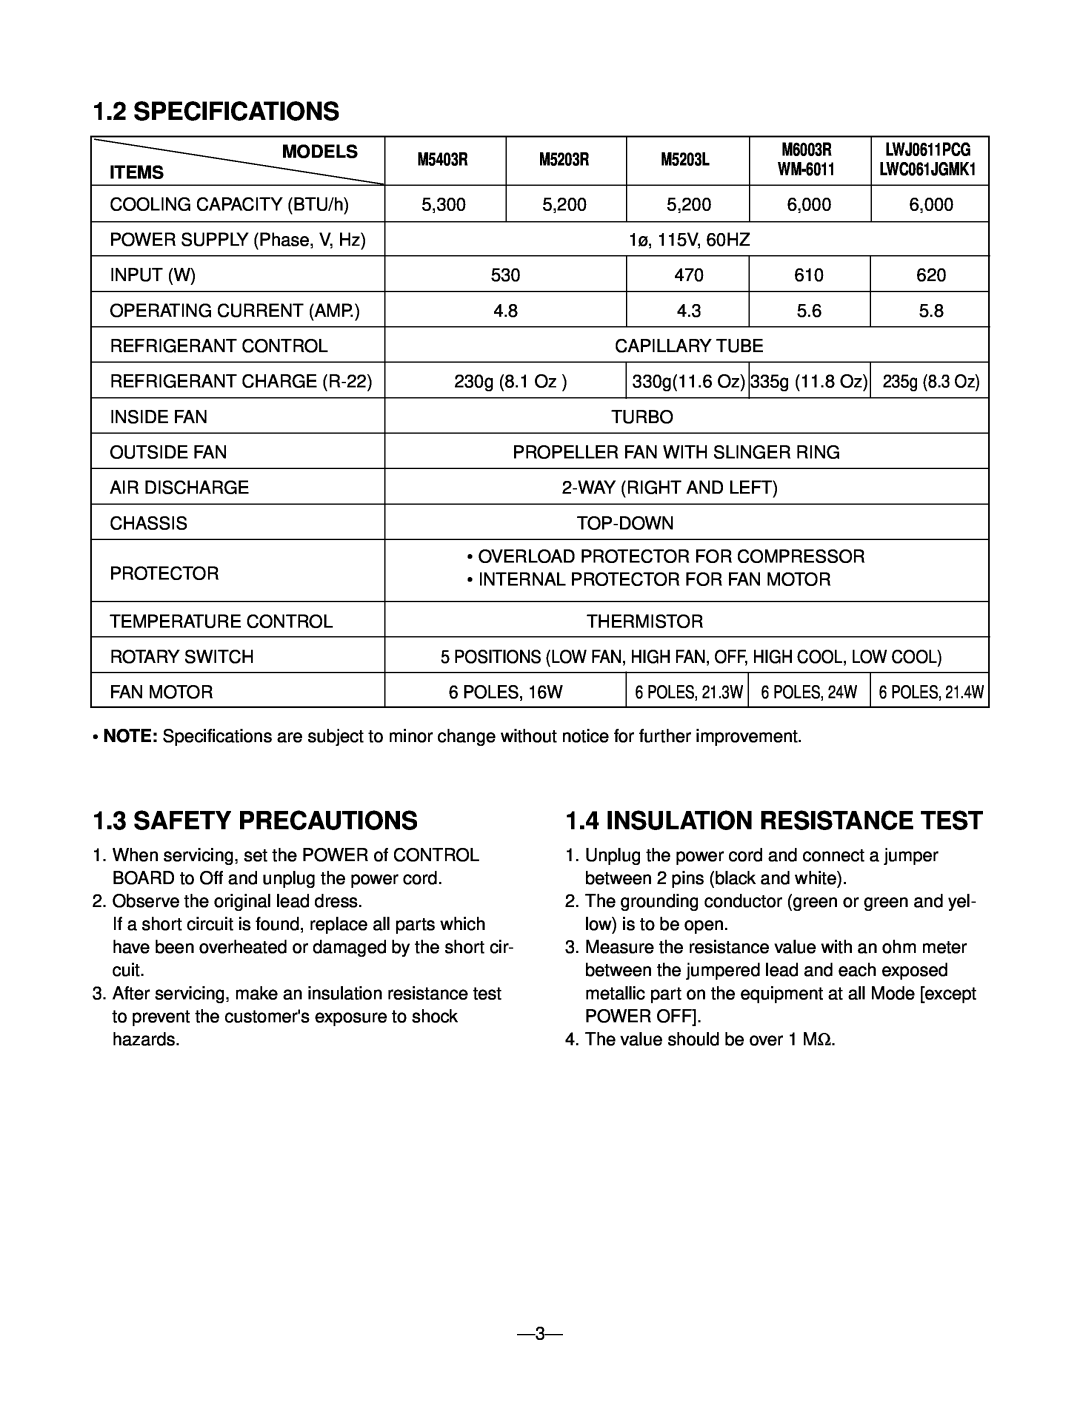 Goldstar M5203L, WM-6011 Specifications, Safety Precautions, Insulation Resistance Test, Models, M5203R, M6003R, Items 